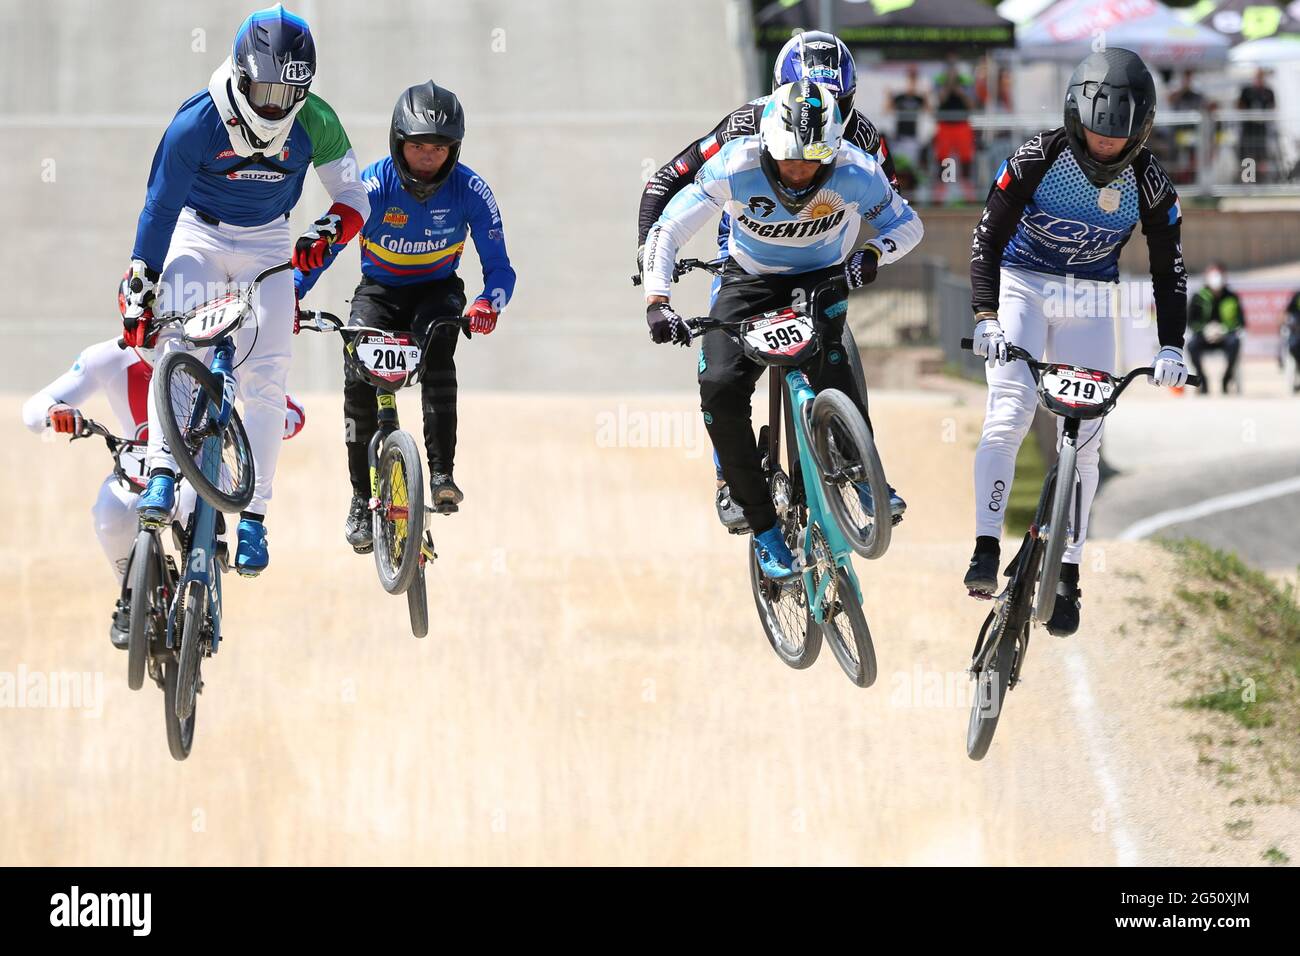 Giacomo FANTONI of Italy (117) and Dylan GOBERT of France (219) compete in the UCI BMX Supercross World Cup Round 1 at the BMX Olympic Arena on May 8t Stock Photo